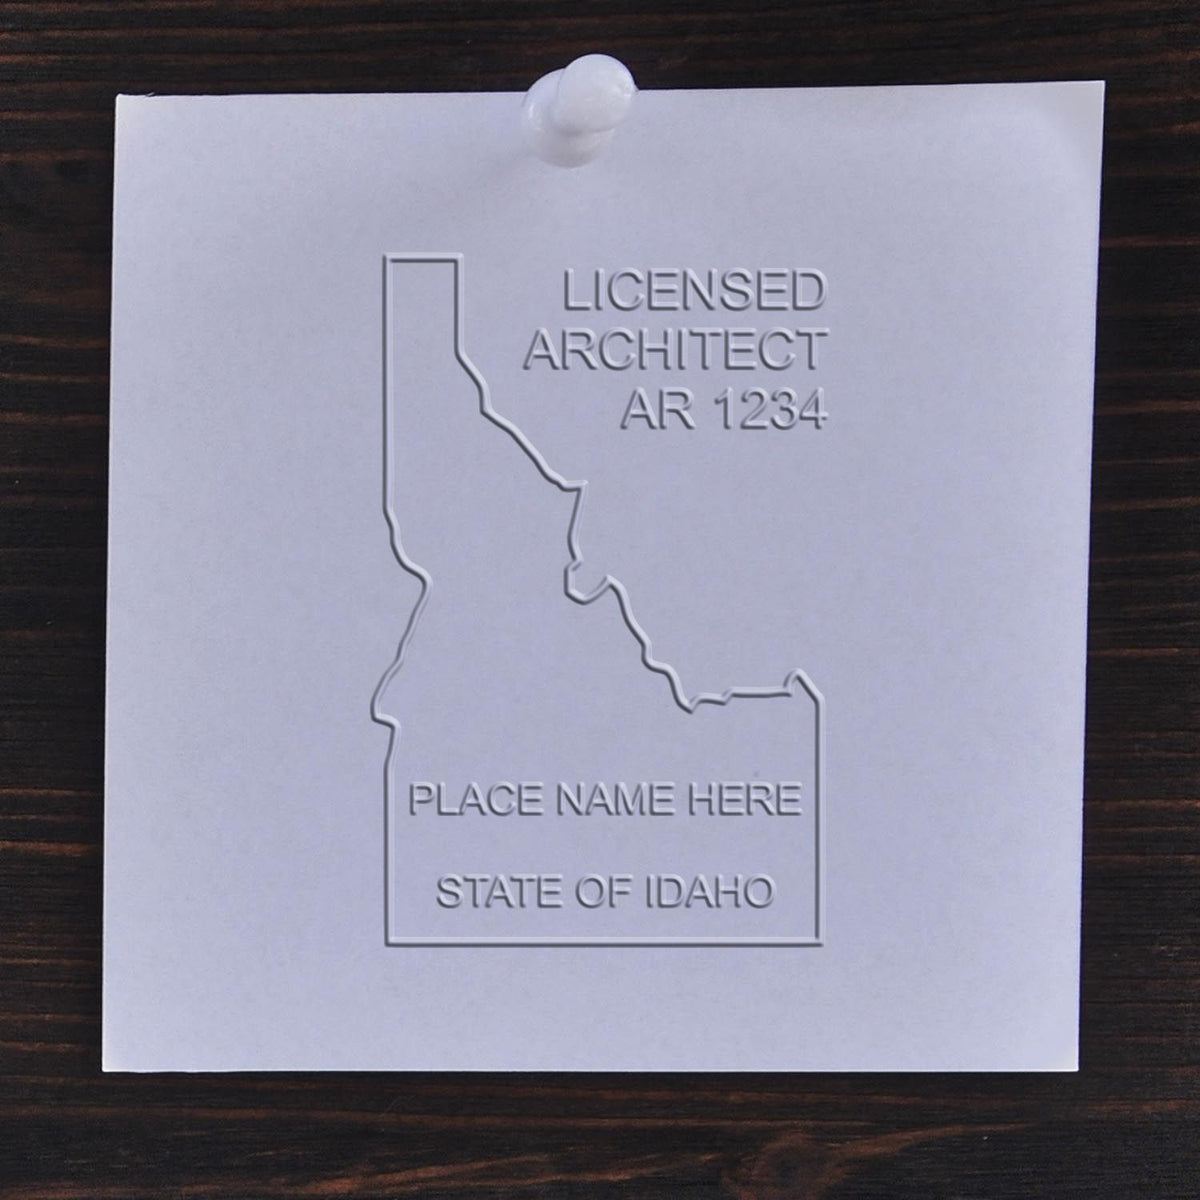 This paper is stamped with a sample imprint of the Extended Long Reach Idaho Architect Seal Embosser, signifying its quality and reliability.